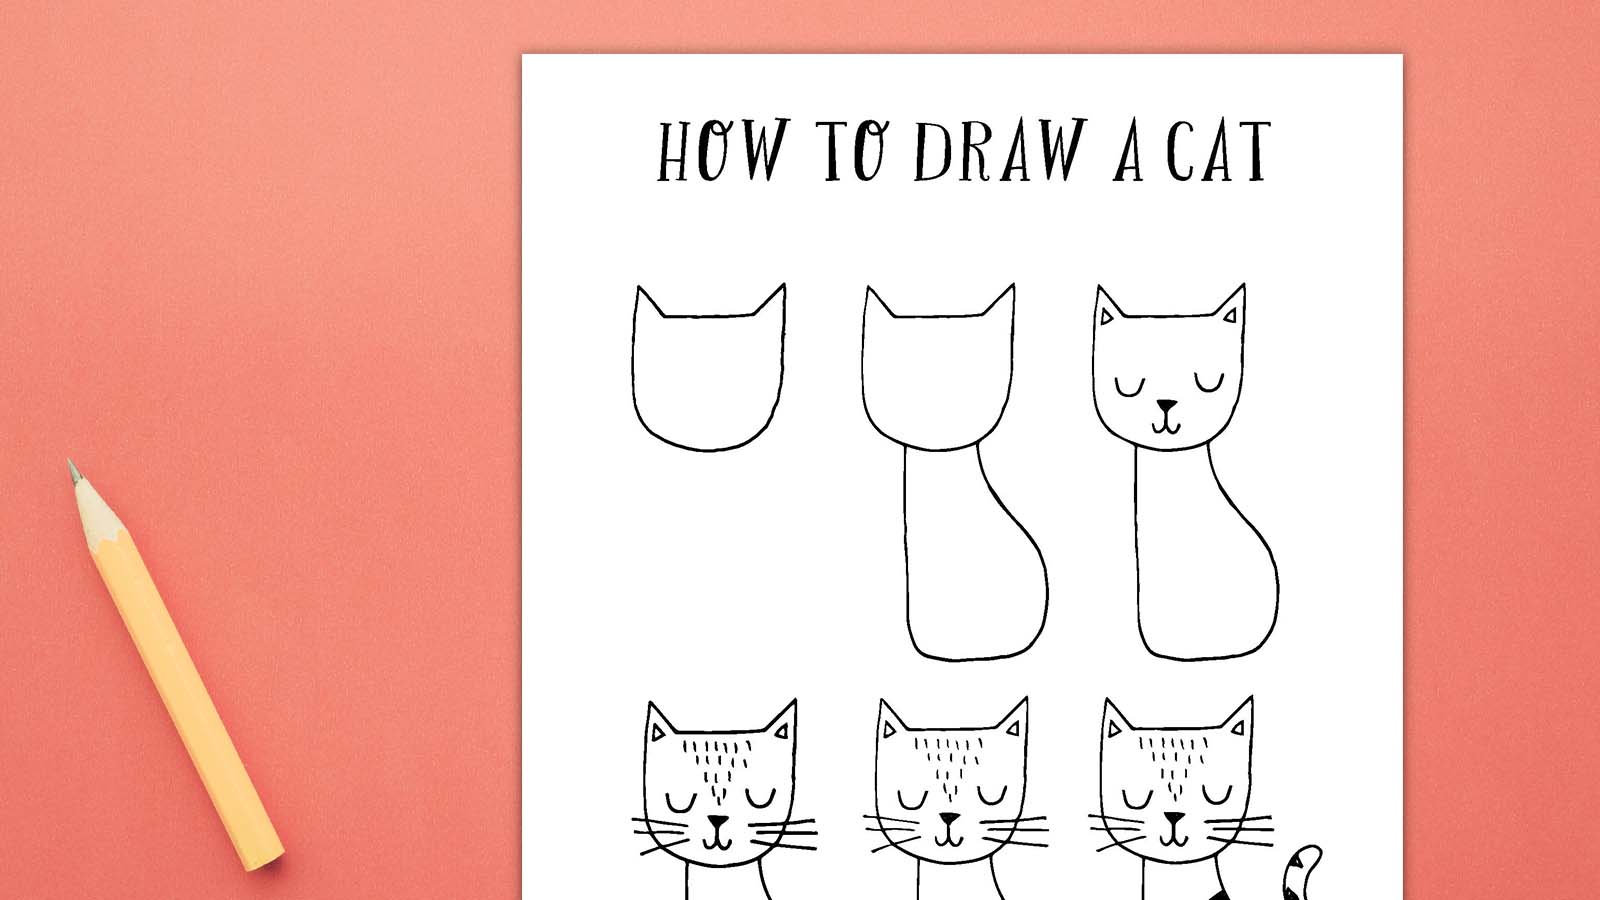 An image says how to draw a cat. It shows six steps of how to draw a cat on a single piece of white paper on a peach background.